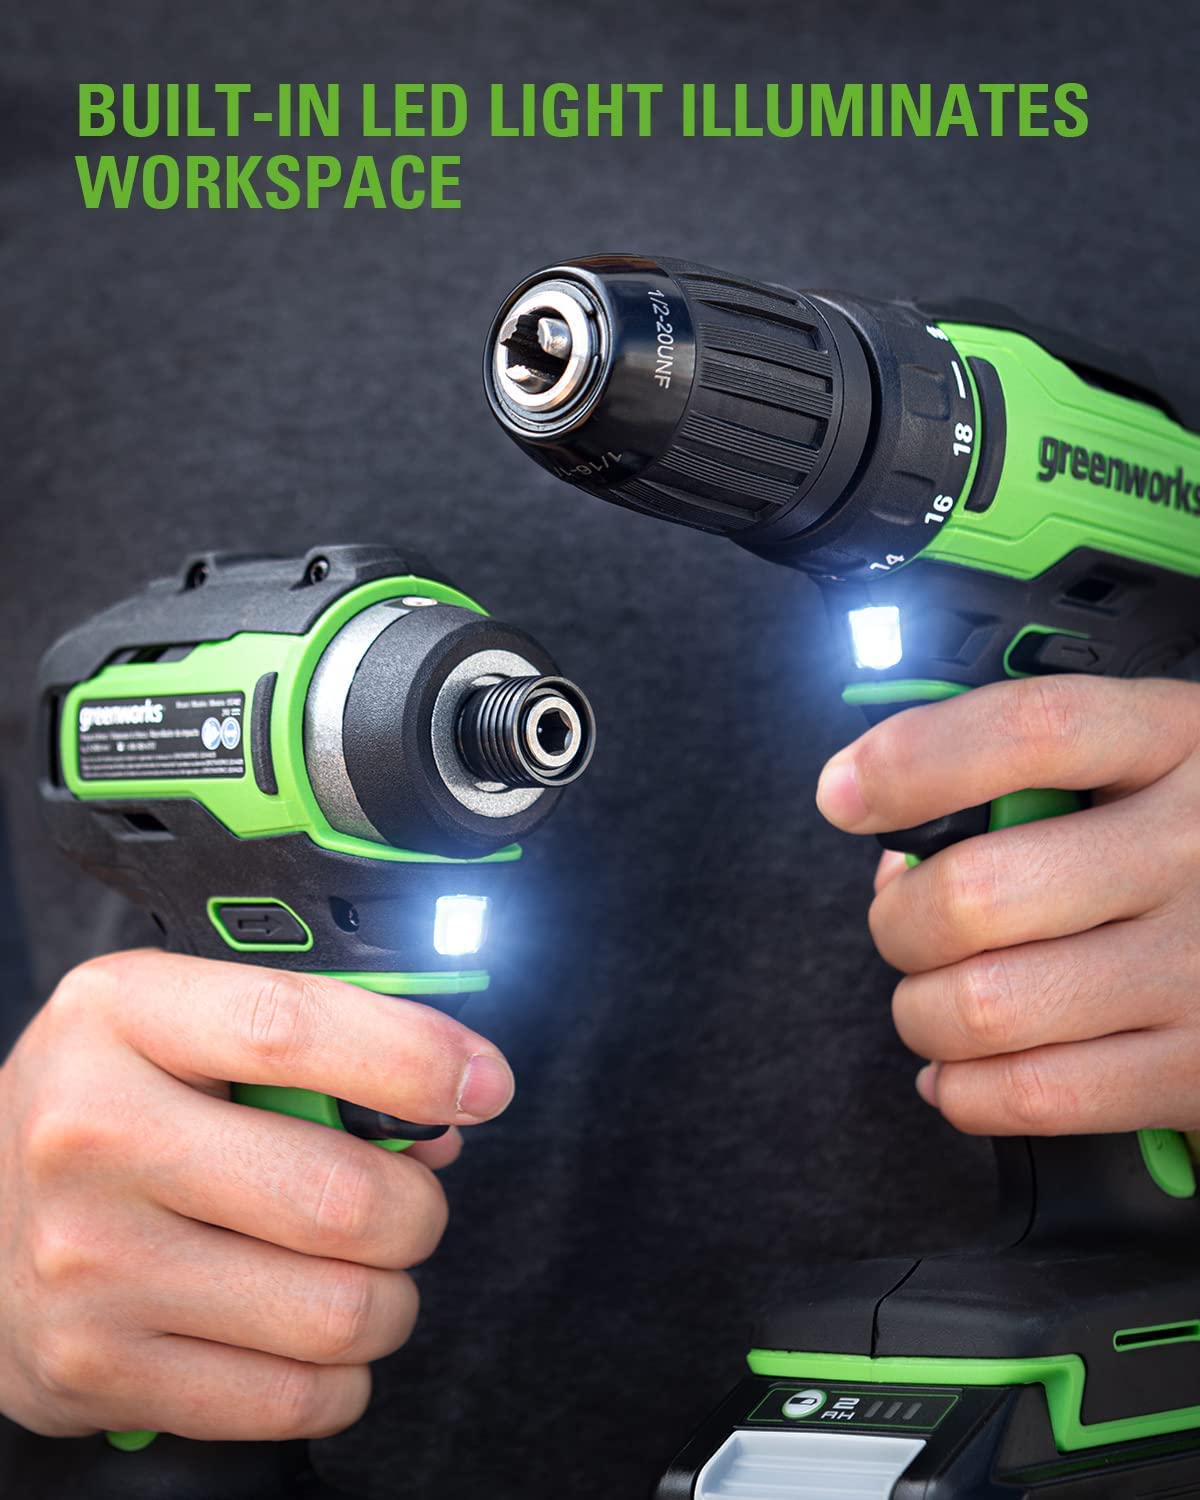 Greenworks 24V Brushless Cordless Drill Impact Driver Combo kit, 1/2”Drill & 1/4”Hex Impact Driver Power Tool Kit, Included 2 Batteries, 1 Charger, 8